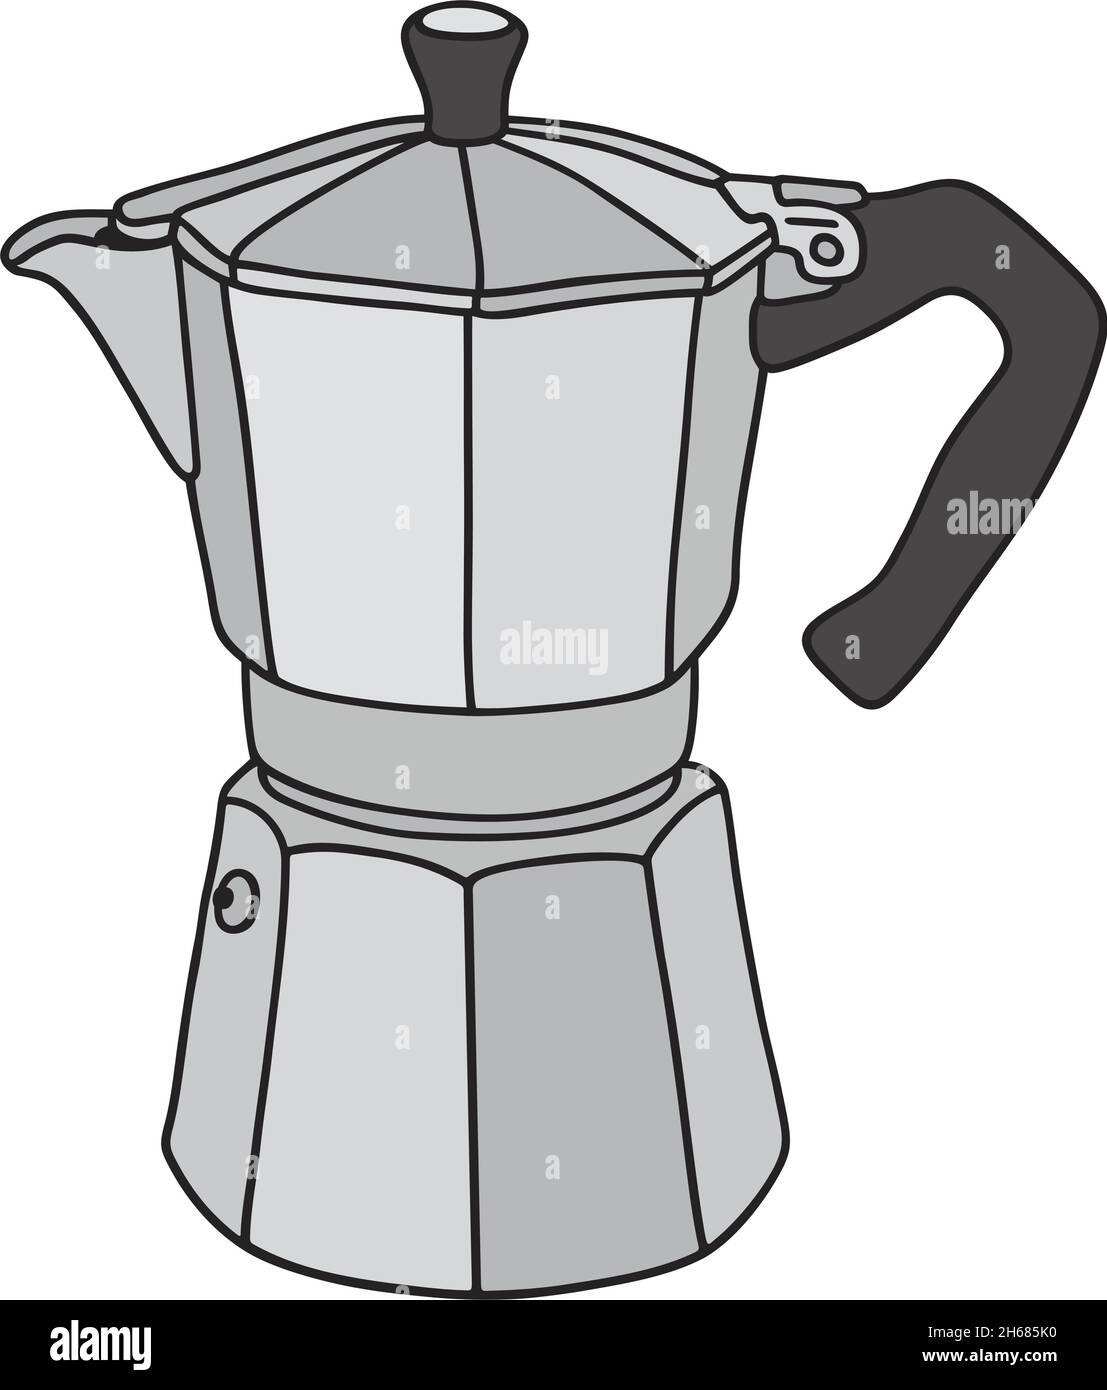 the vectorized hand drawing of a classic metal espresso maker Stock Vector